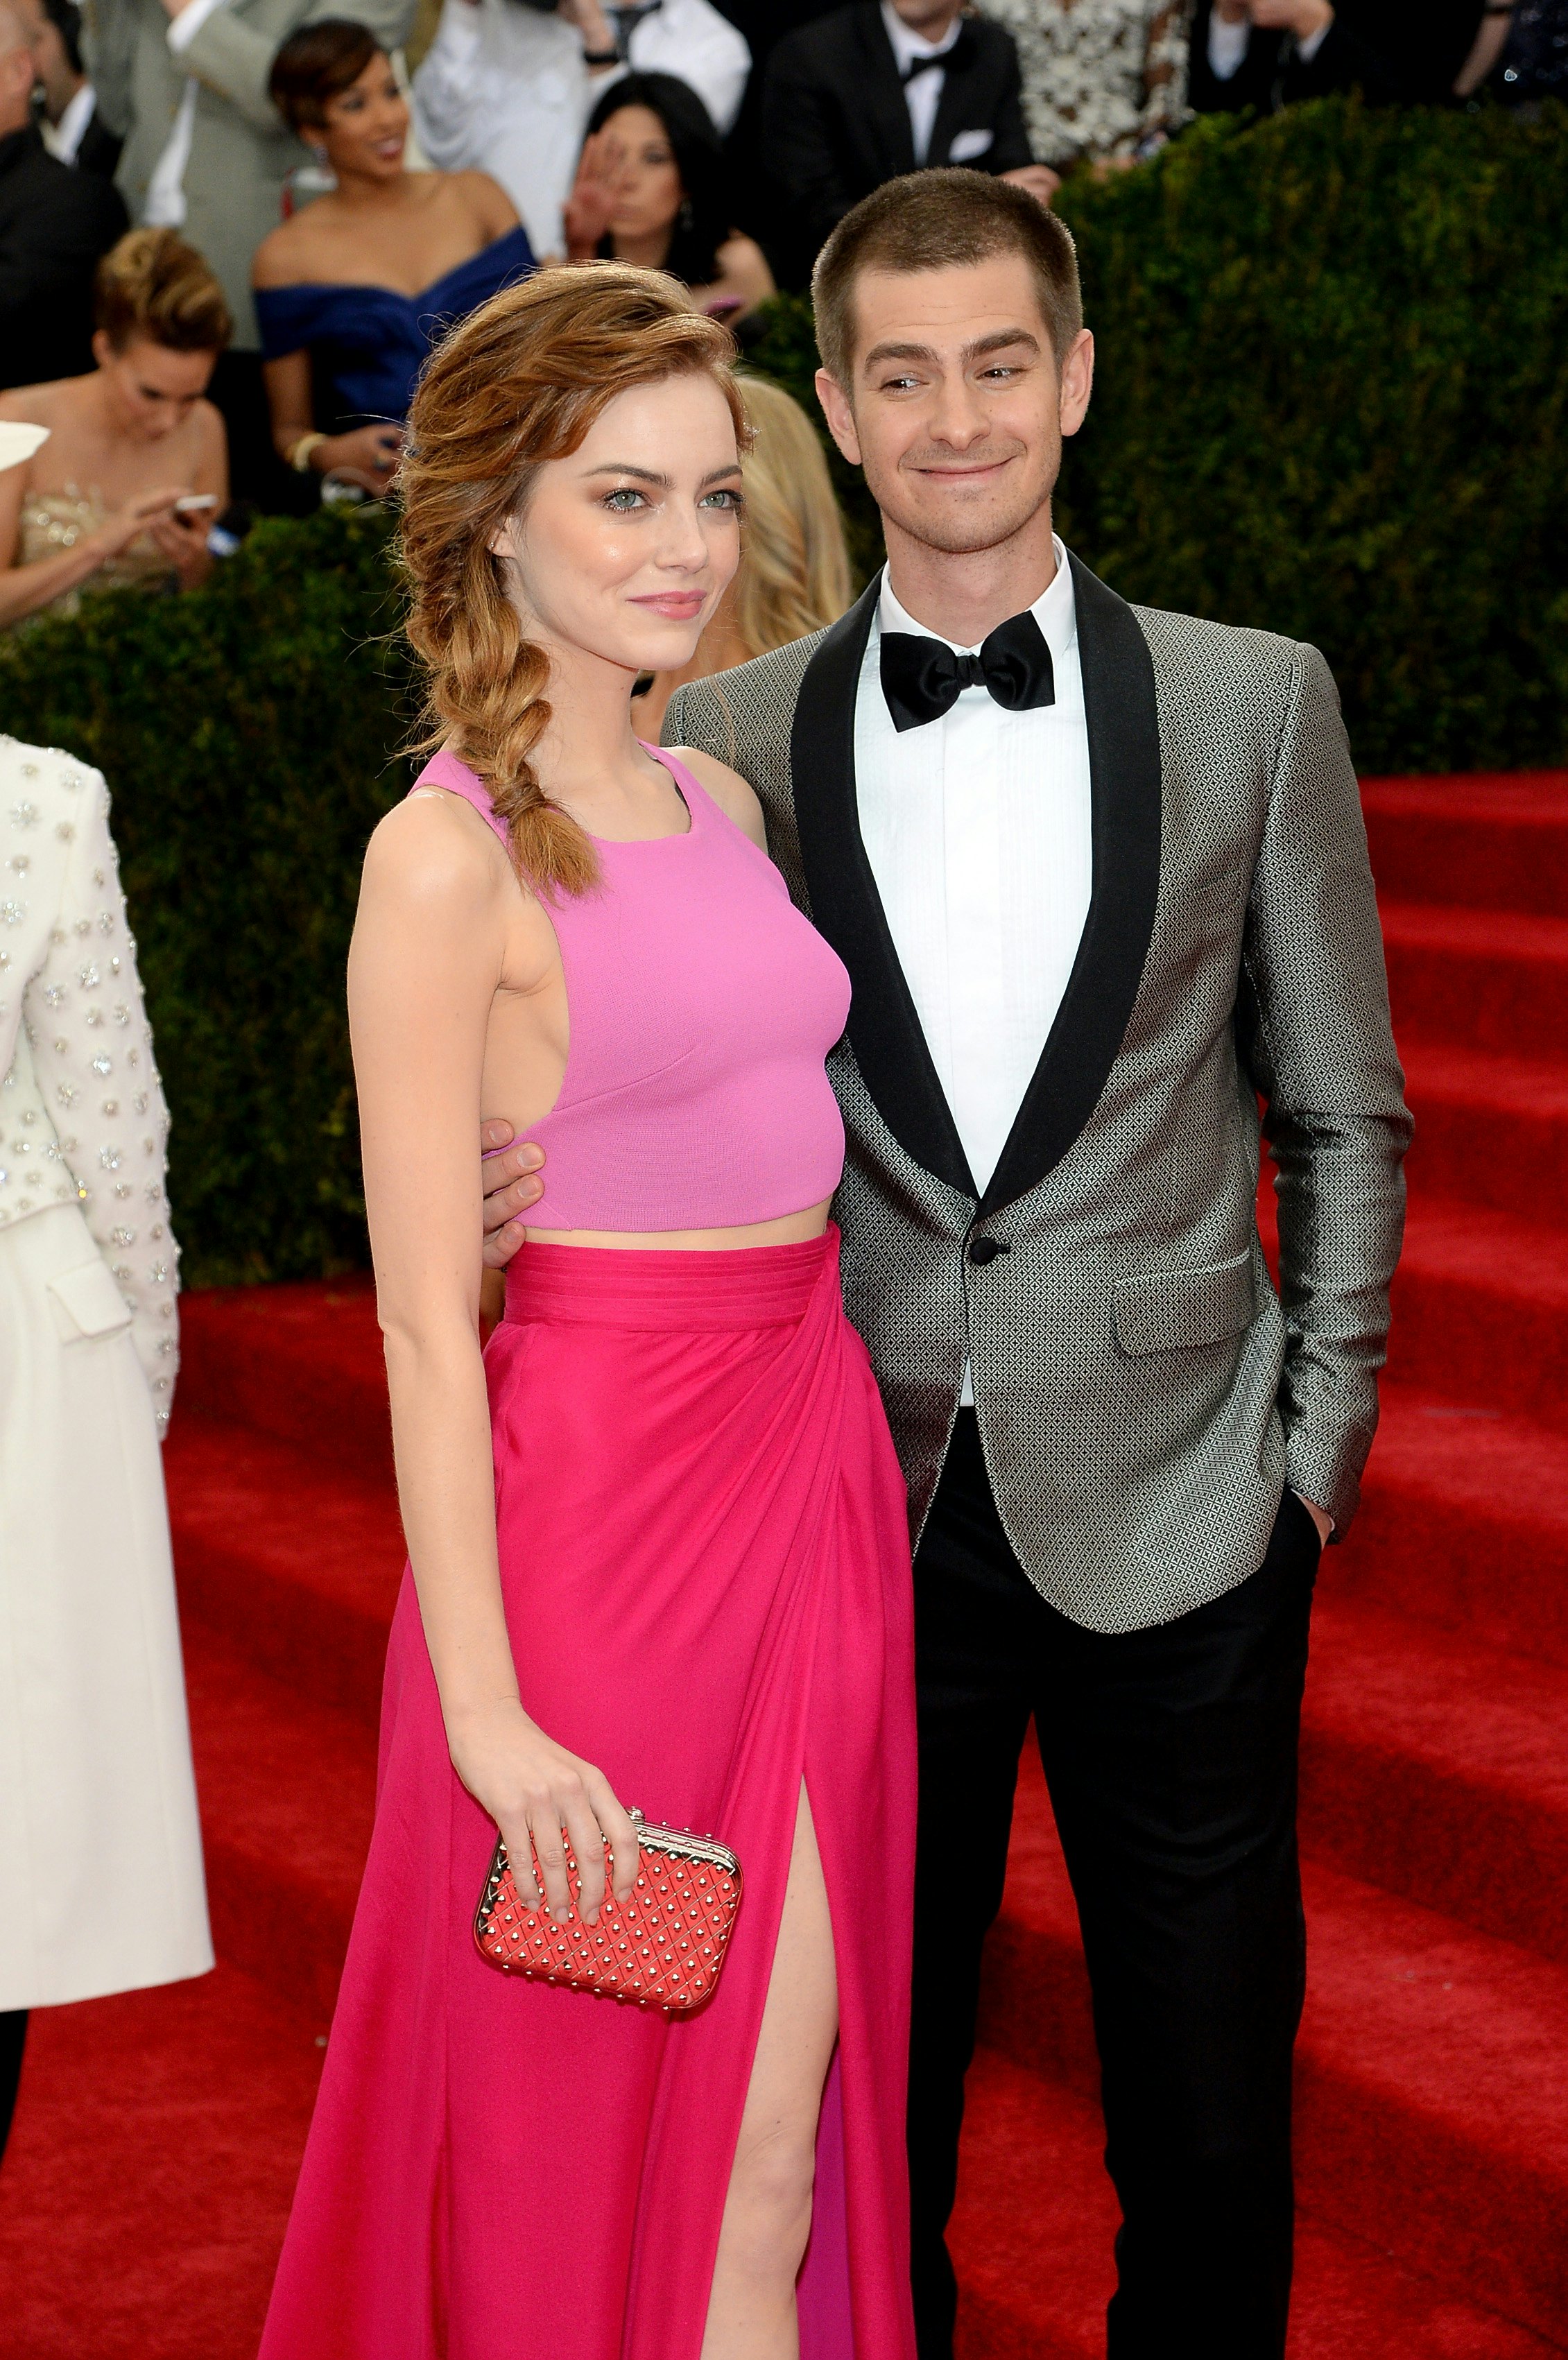 who is andrew garfield dating right now